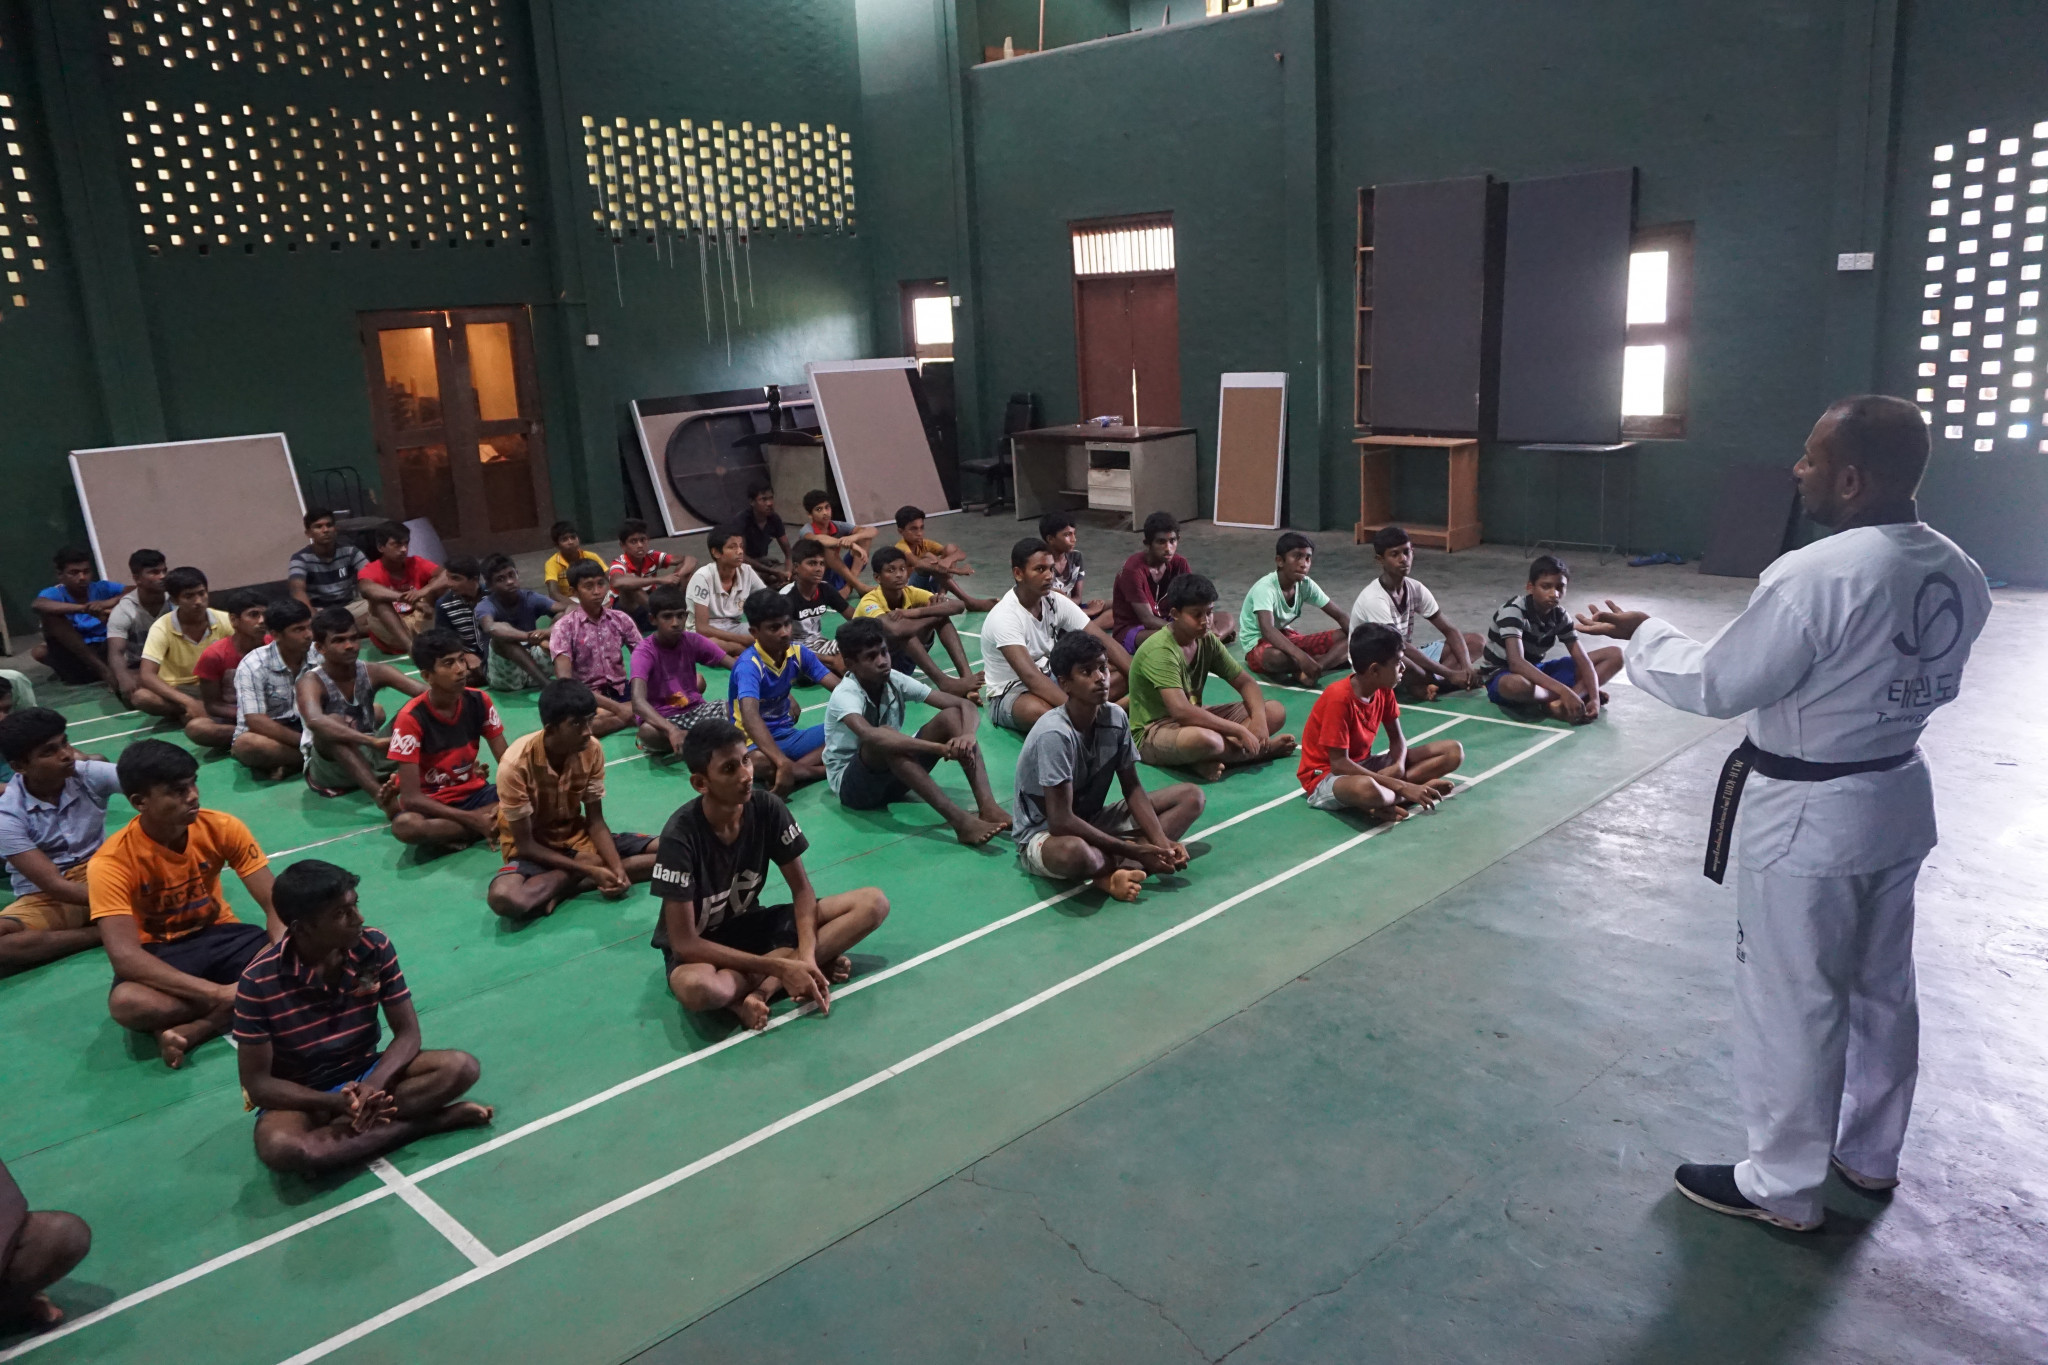 A group of 60 boys from Colombo have been introduced to taekwondo through the 